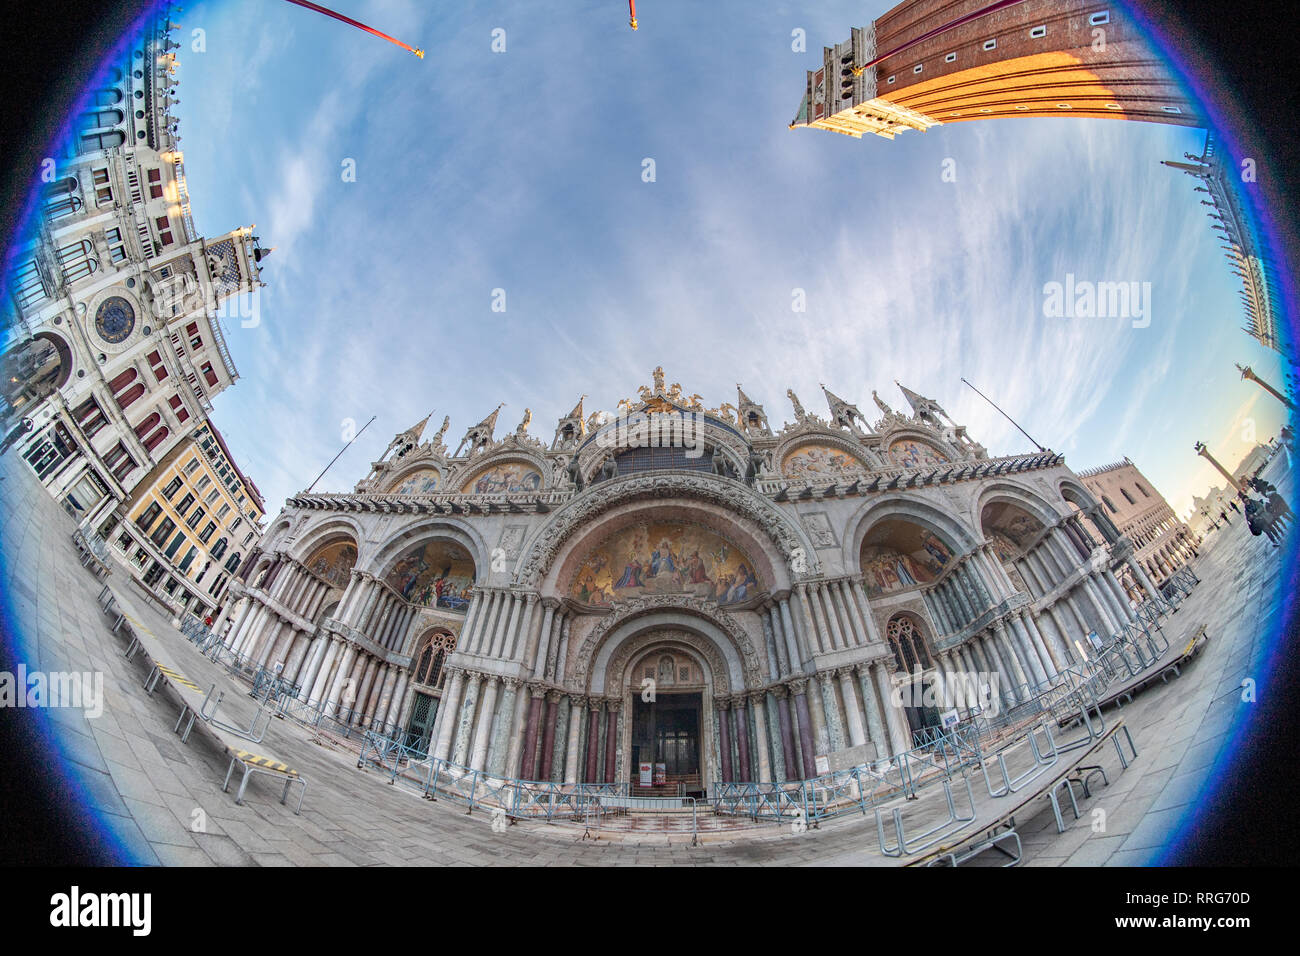 A fisheye view of St Mark's Basilica in Venice. From a series of travel photos in Italy. Photo date: Tuesday, February 12, 2019. Photo: Roger Garfield Stock Photo